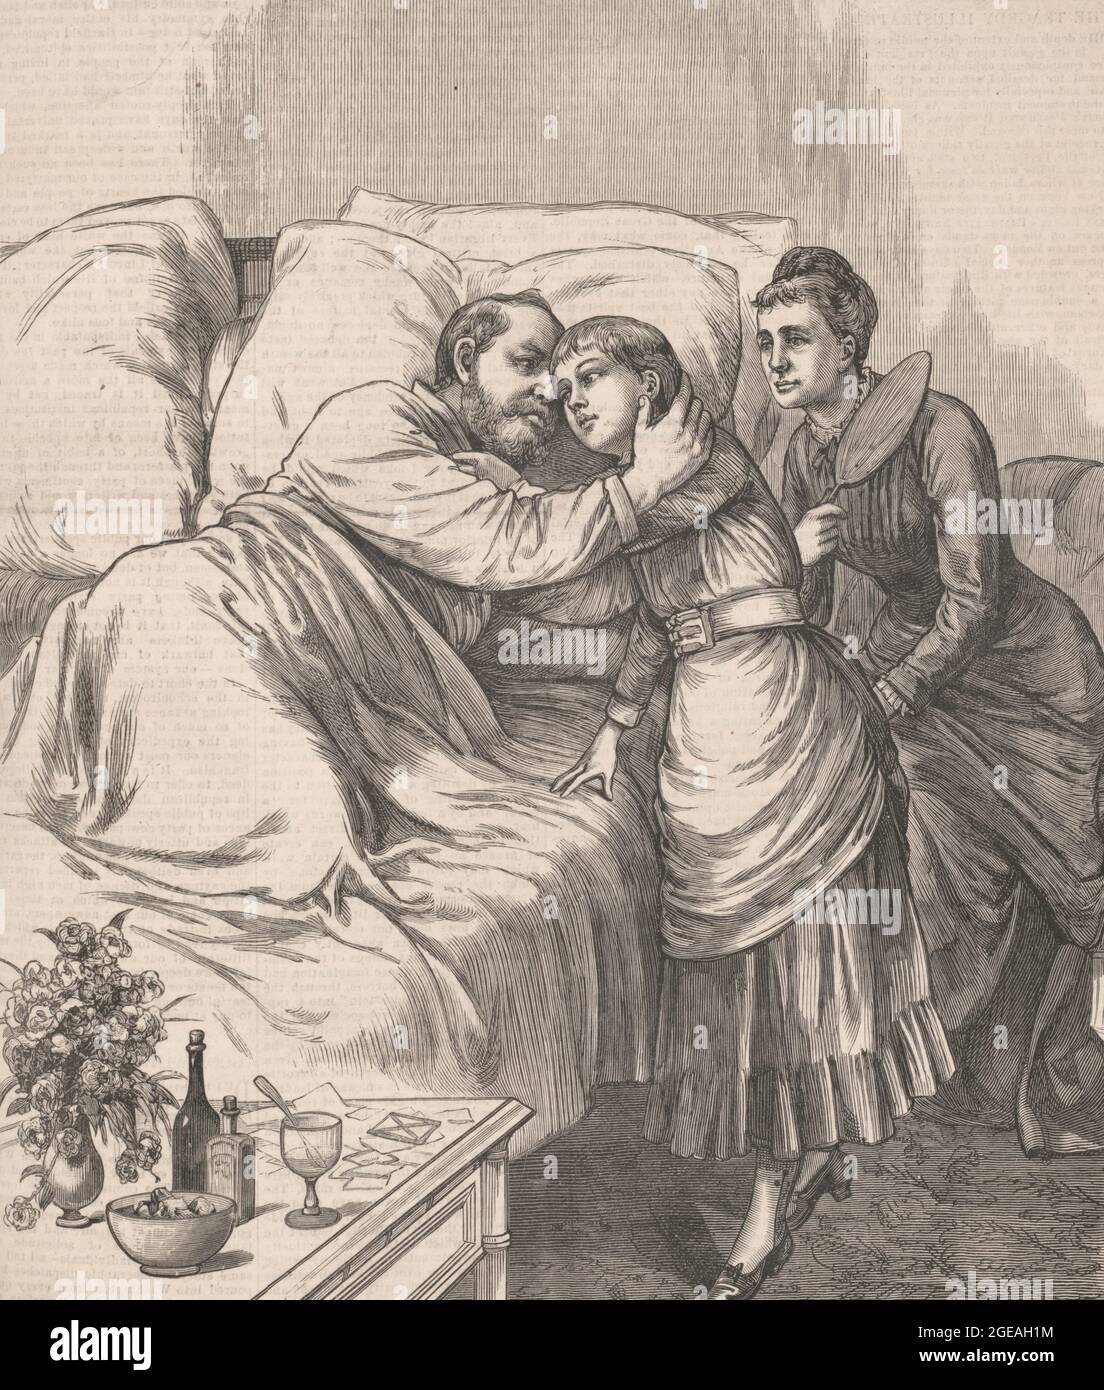 The attempted assassination of the President - a morning greeting by the President's wife and daughter -  Print shows President Garfield, following assassination attempt, lying in bed during visit from his wife and daughter - July 23, 1881 Stock Photo